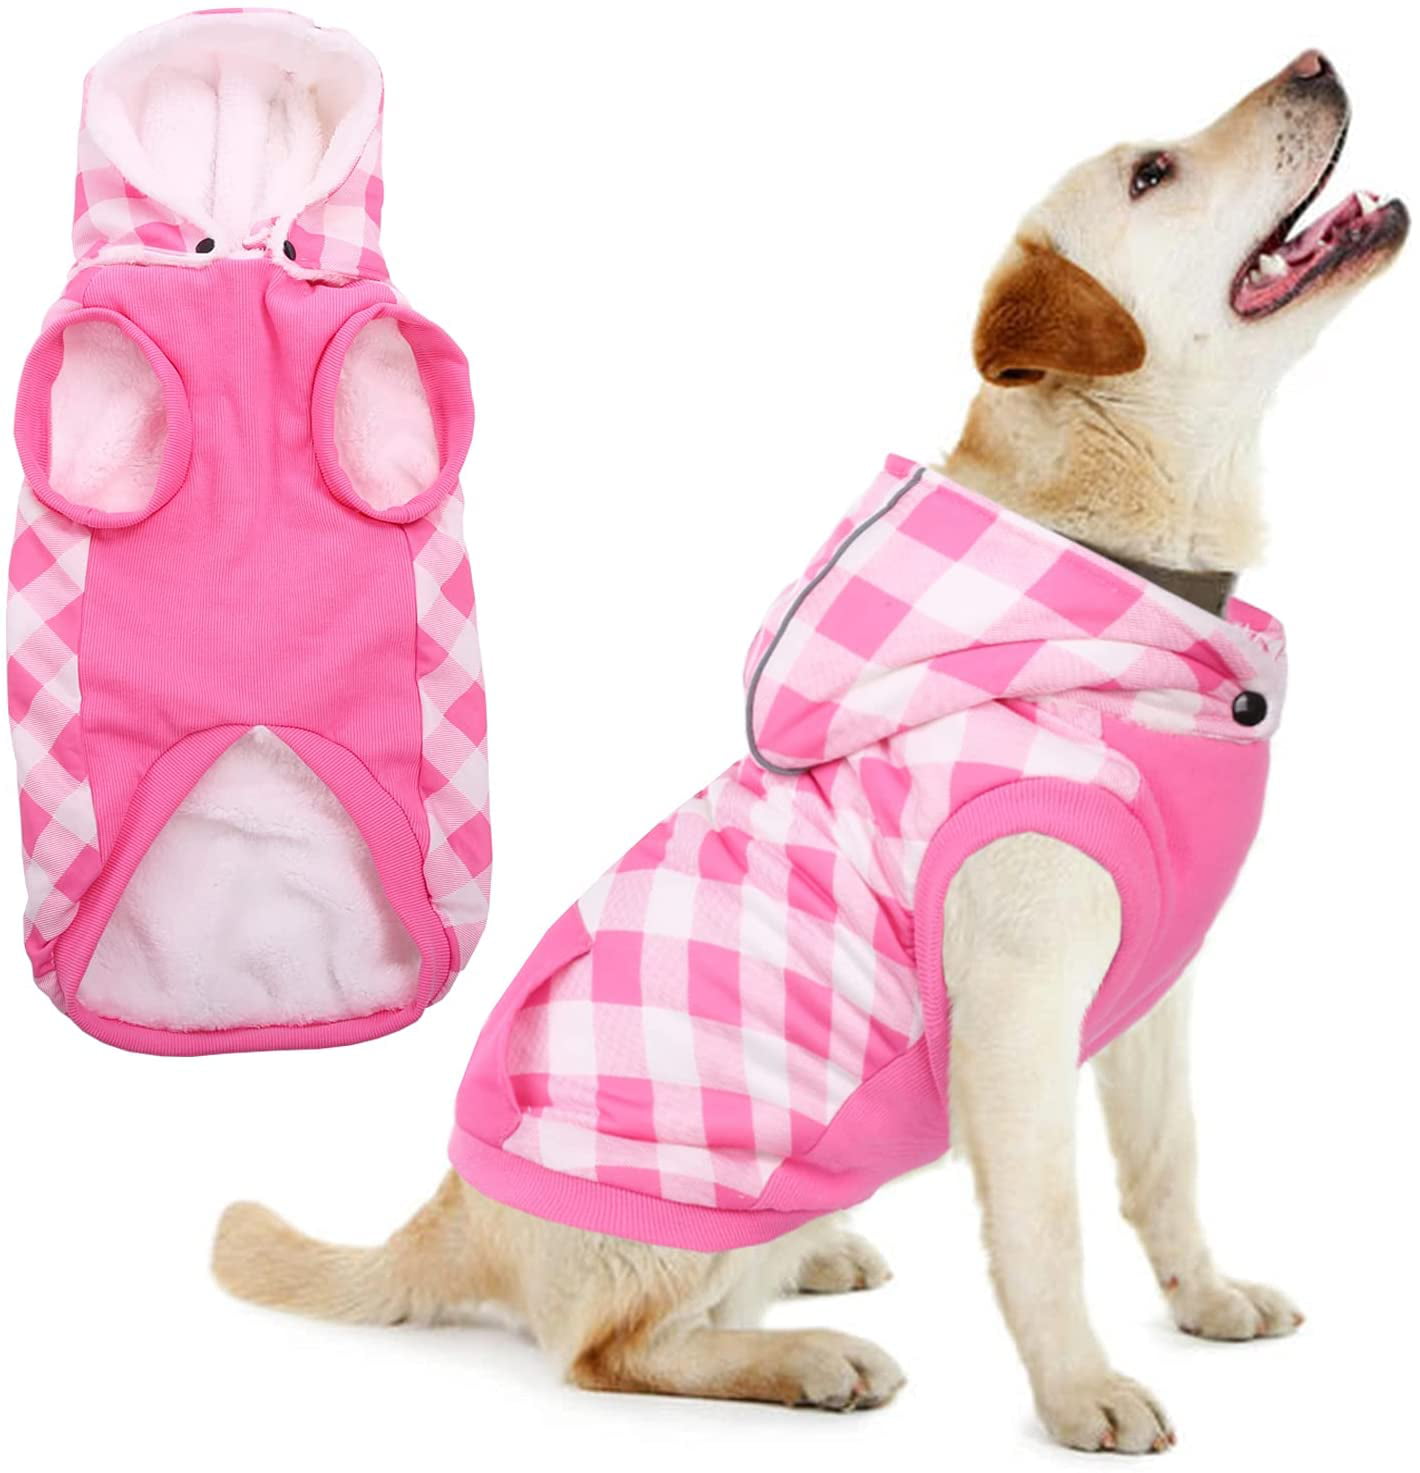 5 Size Pet Dog Coat Winter cold Clothes For Soft Hood Puppy Jacket fast shipping 